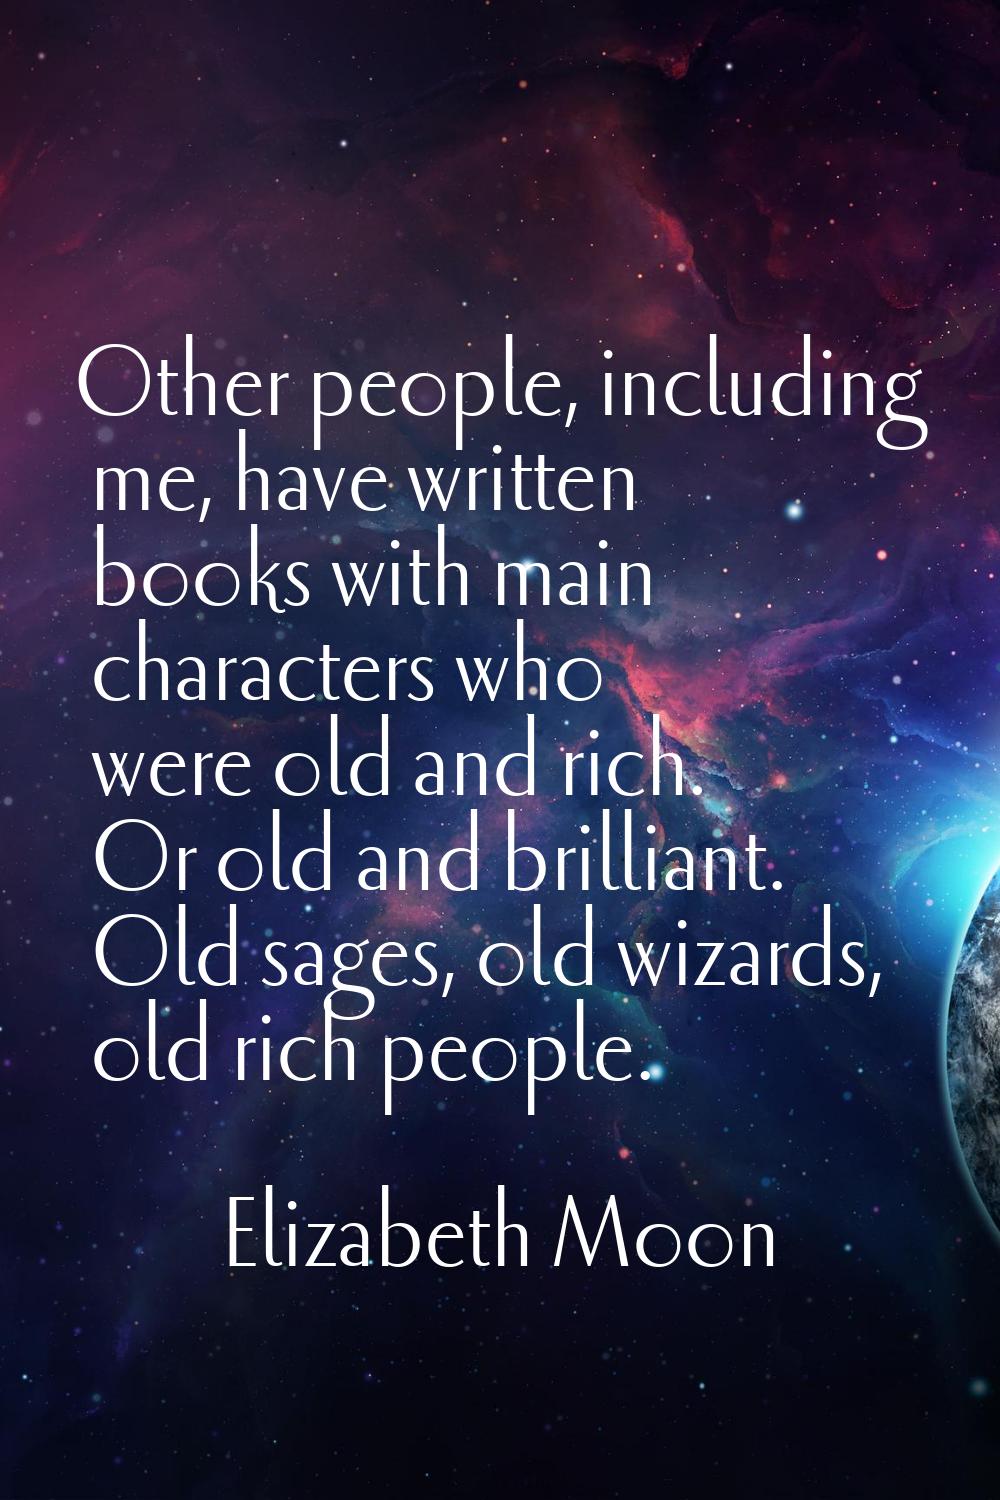 Other people, including me, have written books with main characters who were old and rich. Or old a